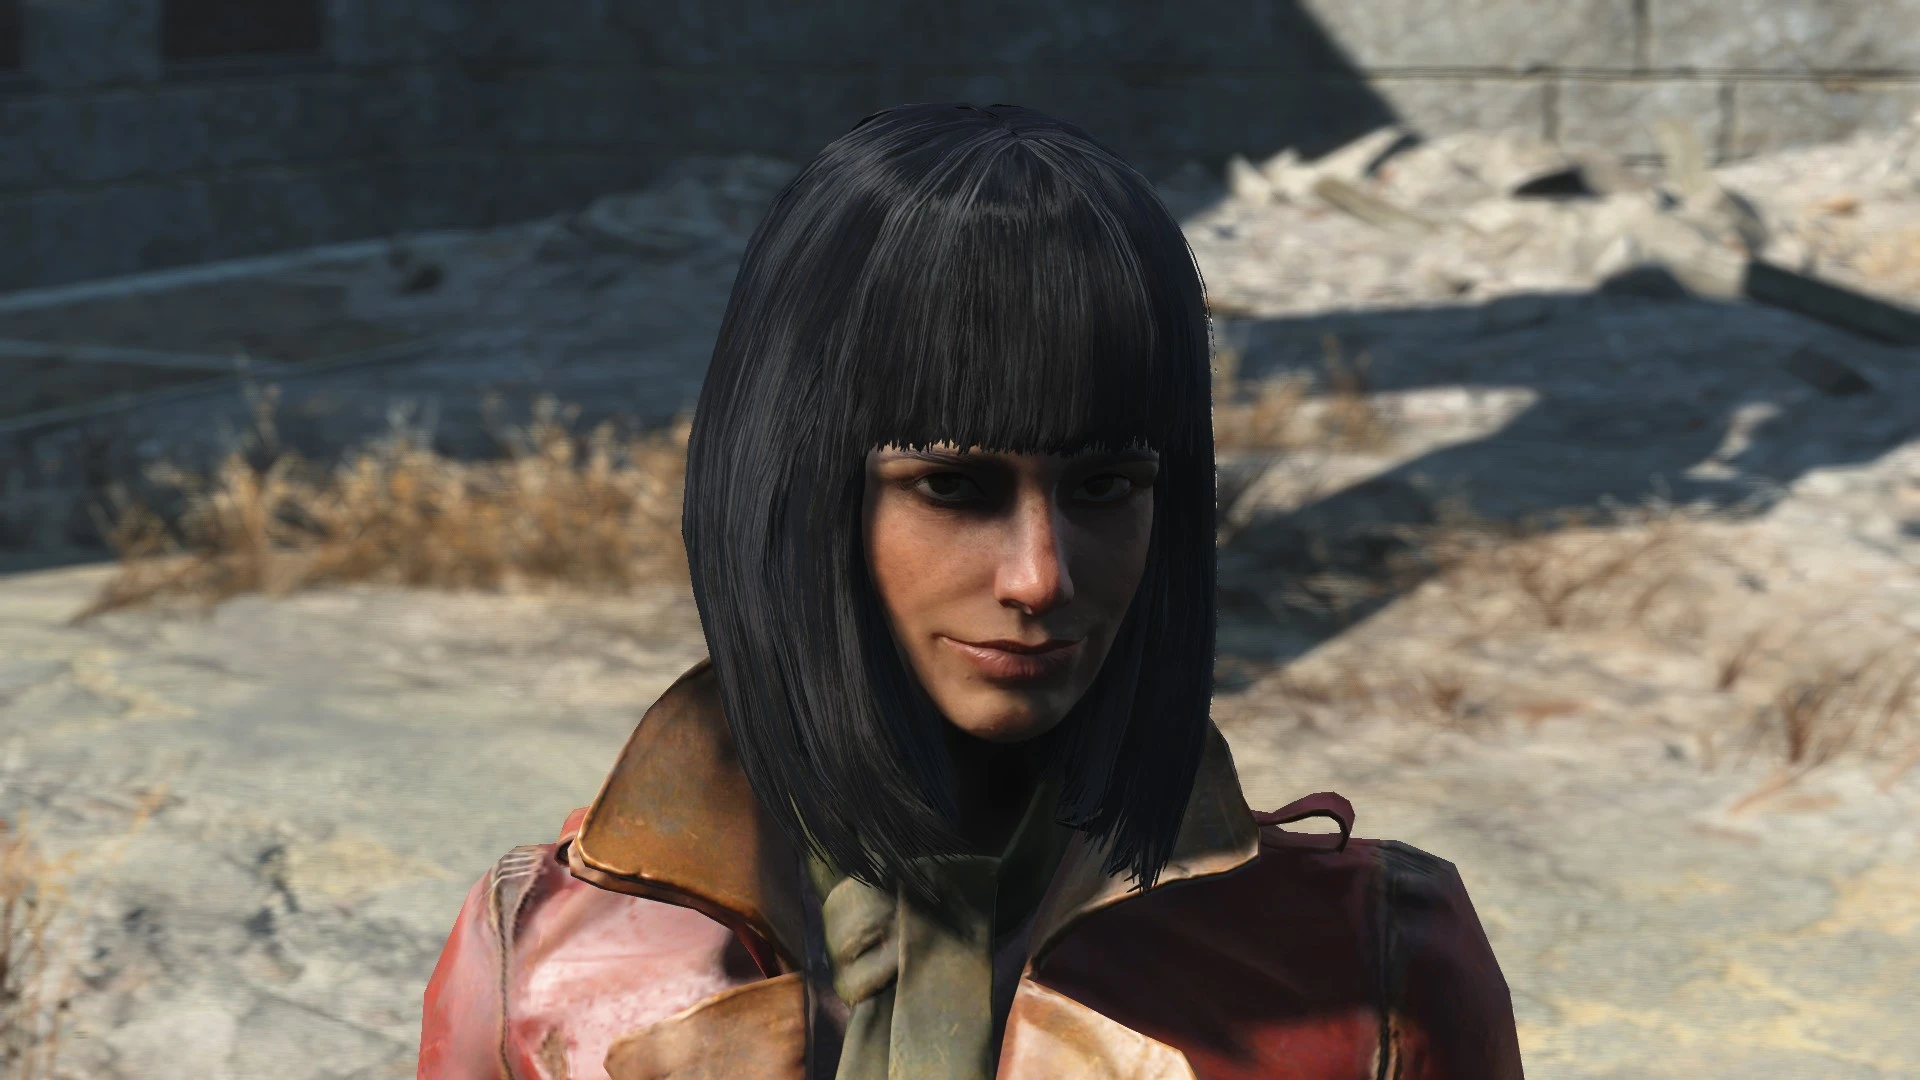 Ponytail hairstyles fallout 4 фото 41